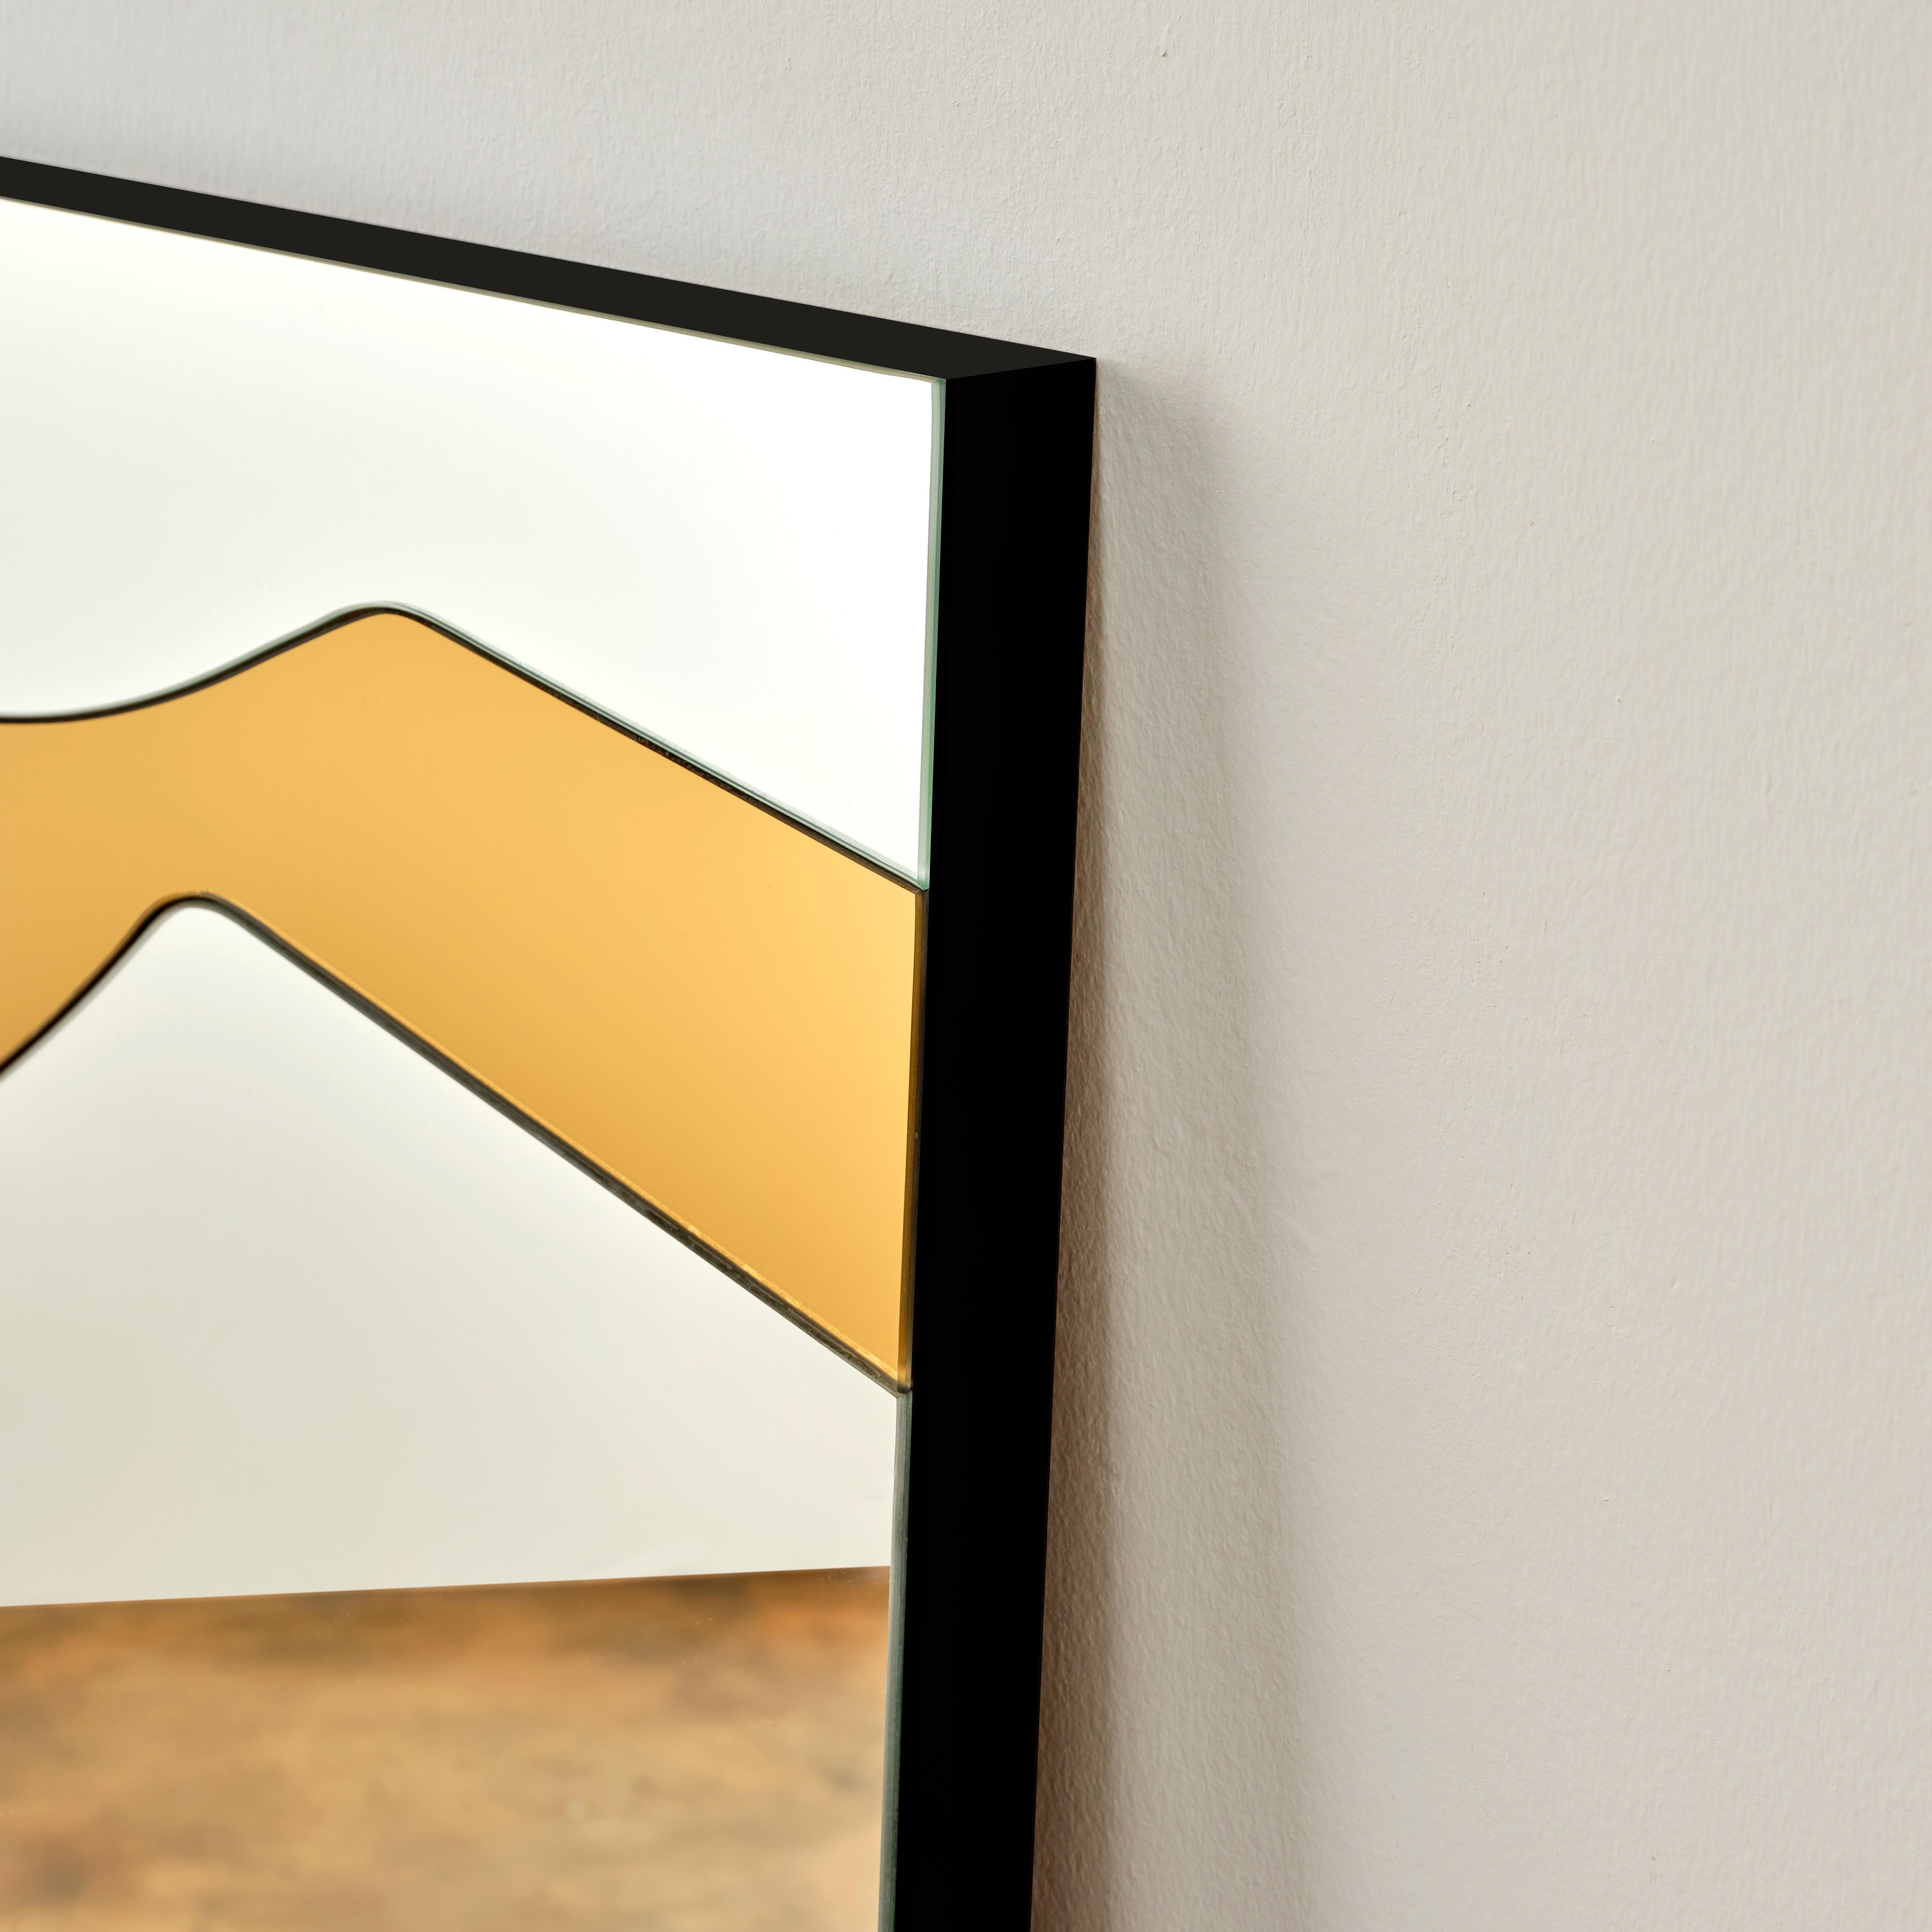 Exposè mirror is made of two large different colored glasses cut into many smaller segments and joint together by hand in order to create a juxtaposed image. Highlighting the line between art and function, this is a unique piece that plays with the